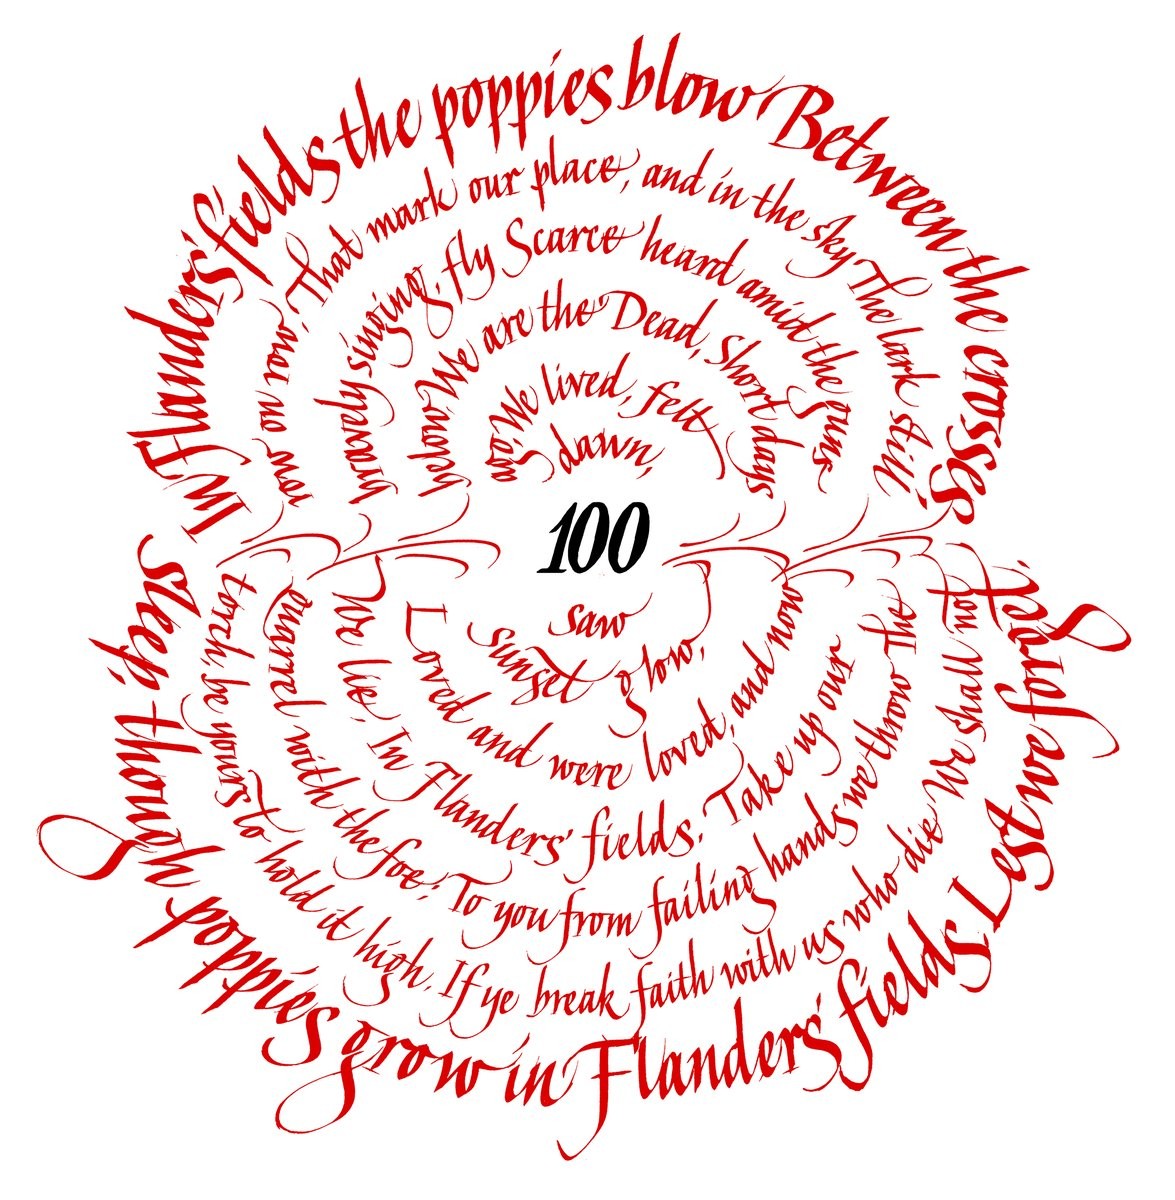 A calipraphic representation of a Remembrance Day poppy by Satwinder Sehmi. The poppy is drawn with the words to the poem In Flanders Field.